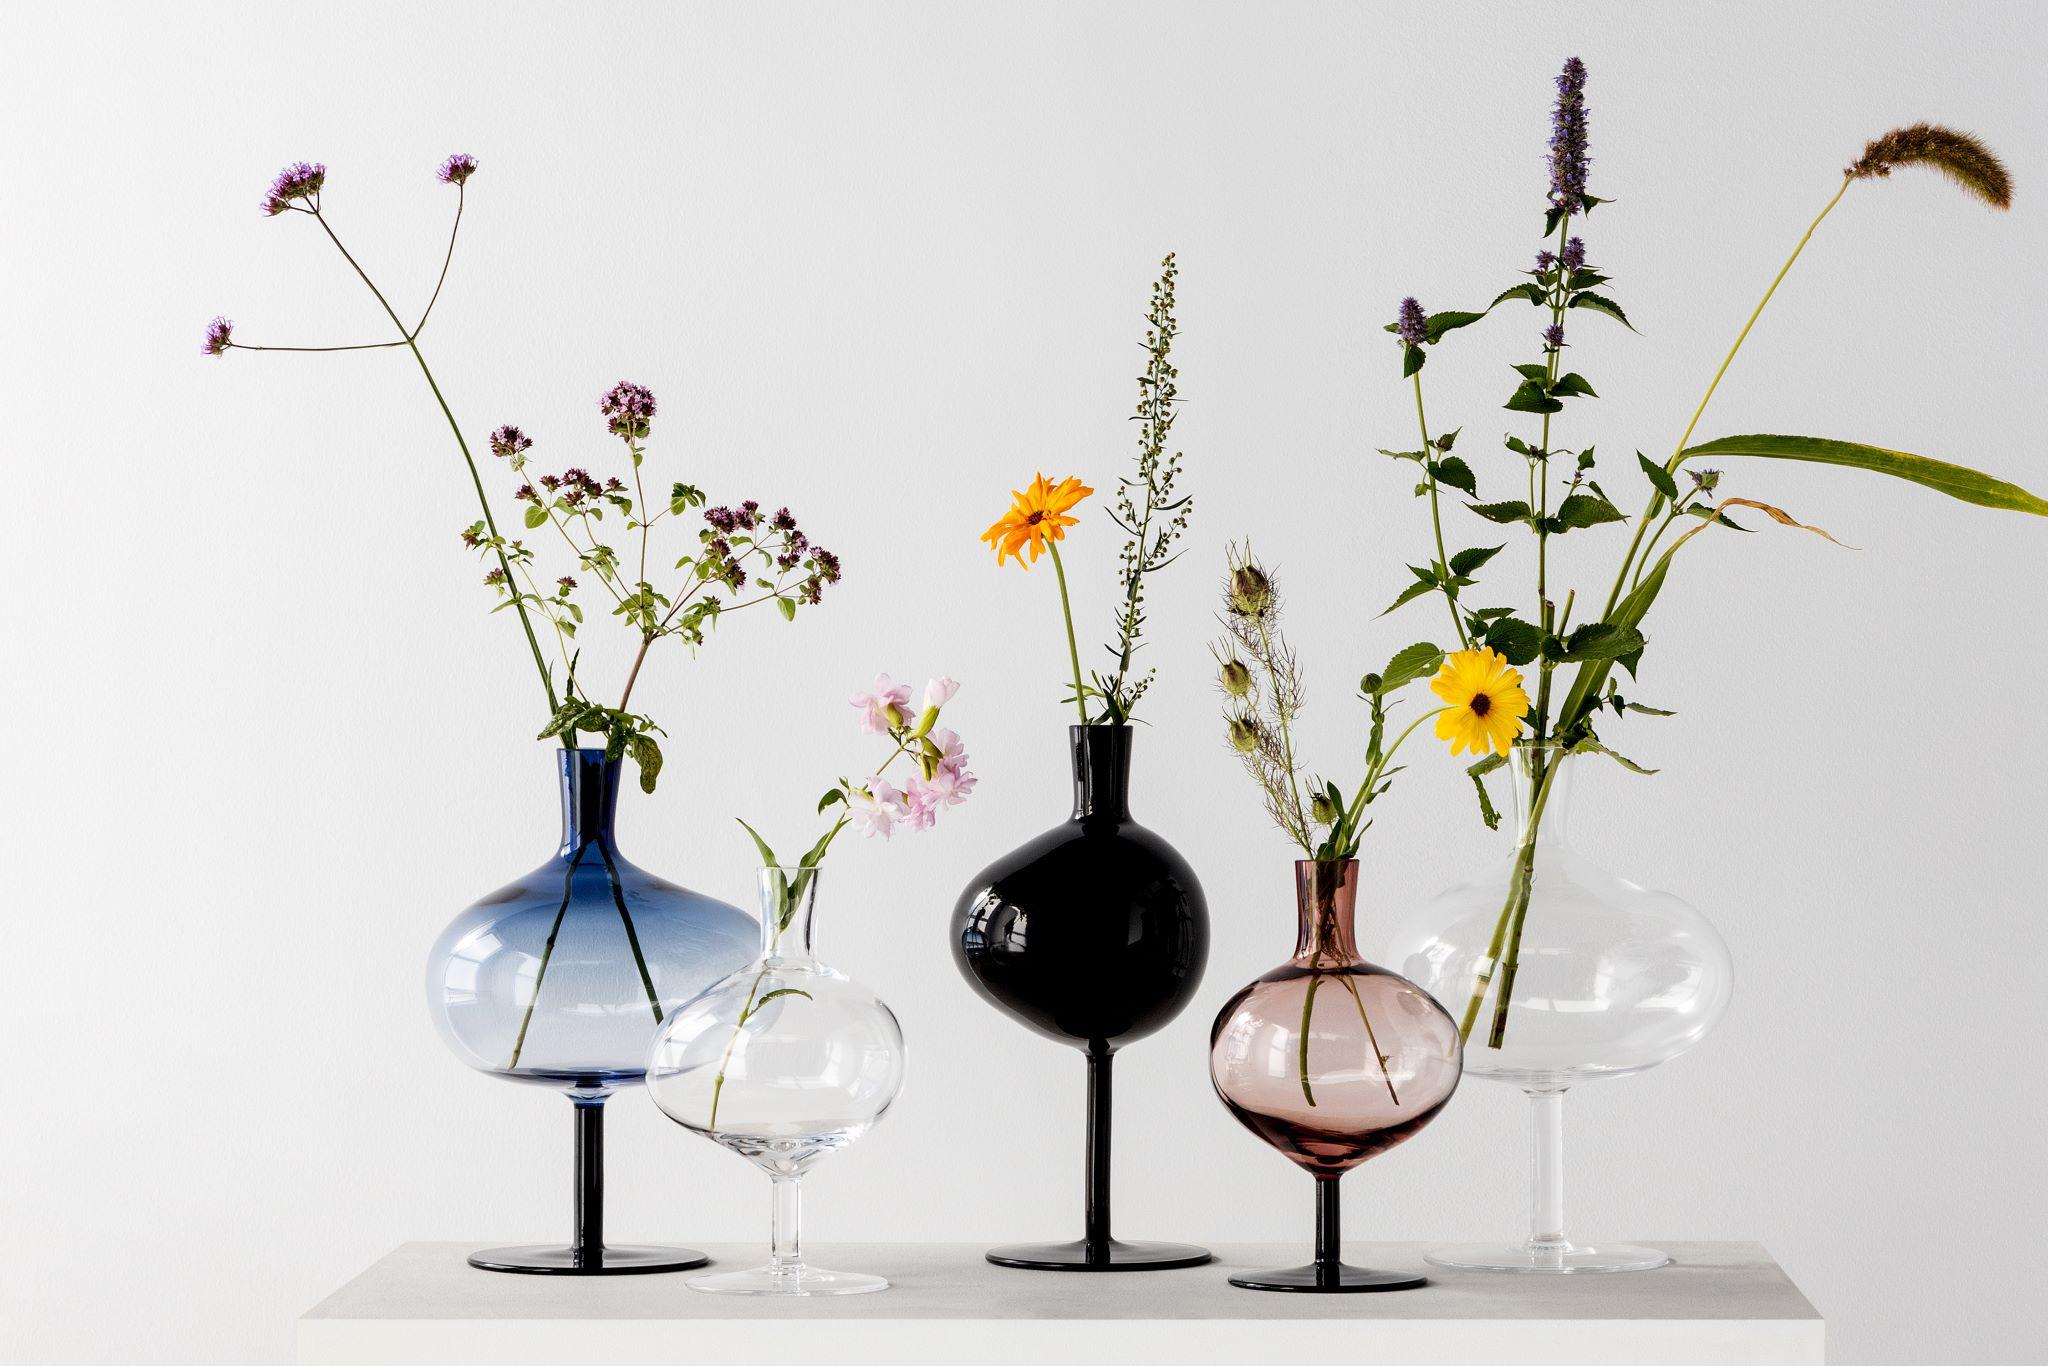 Five glass vases on a foot. All vases have fresh flowers in them.